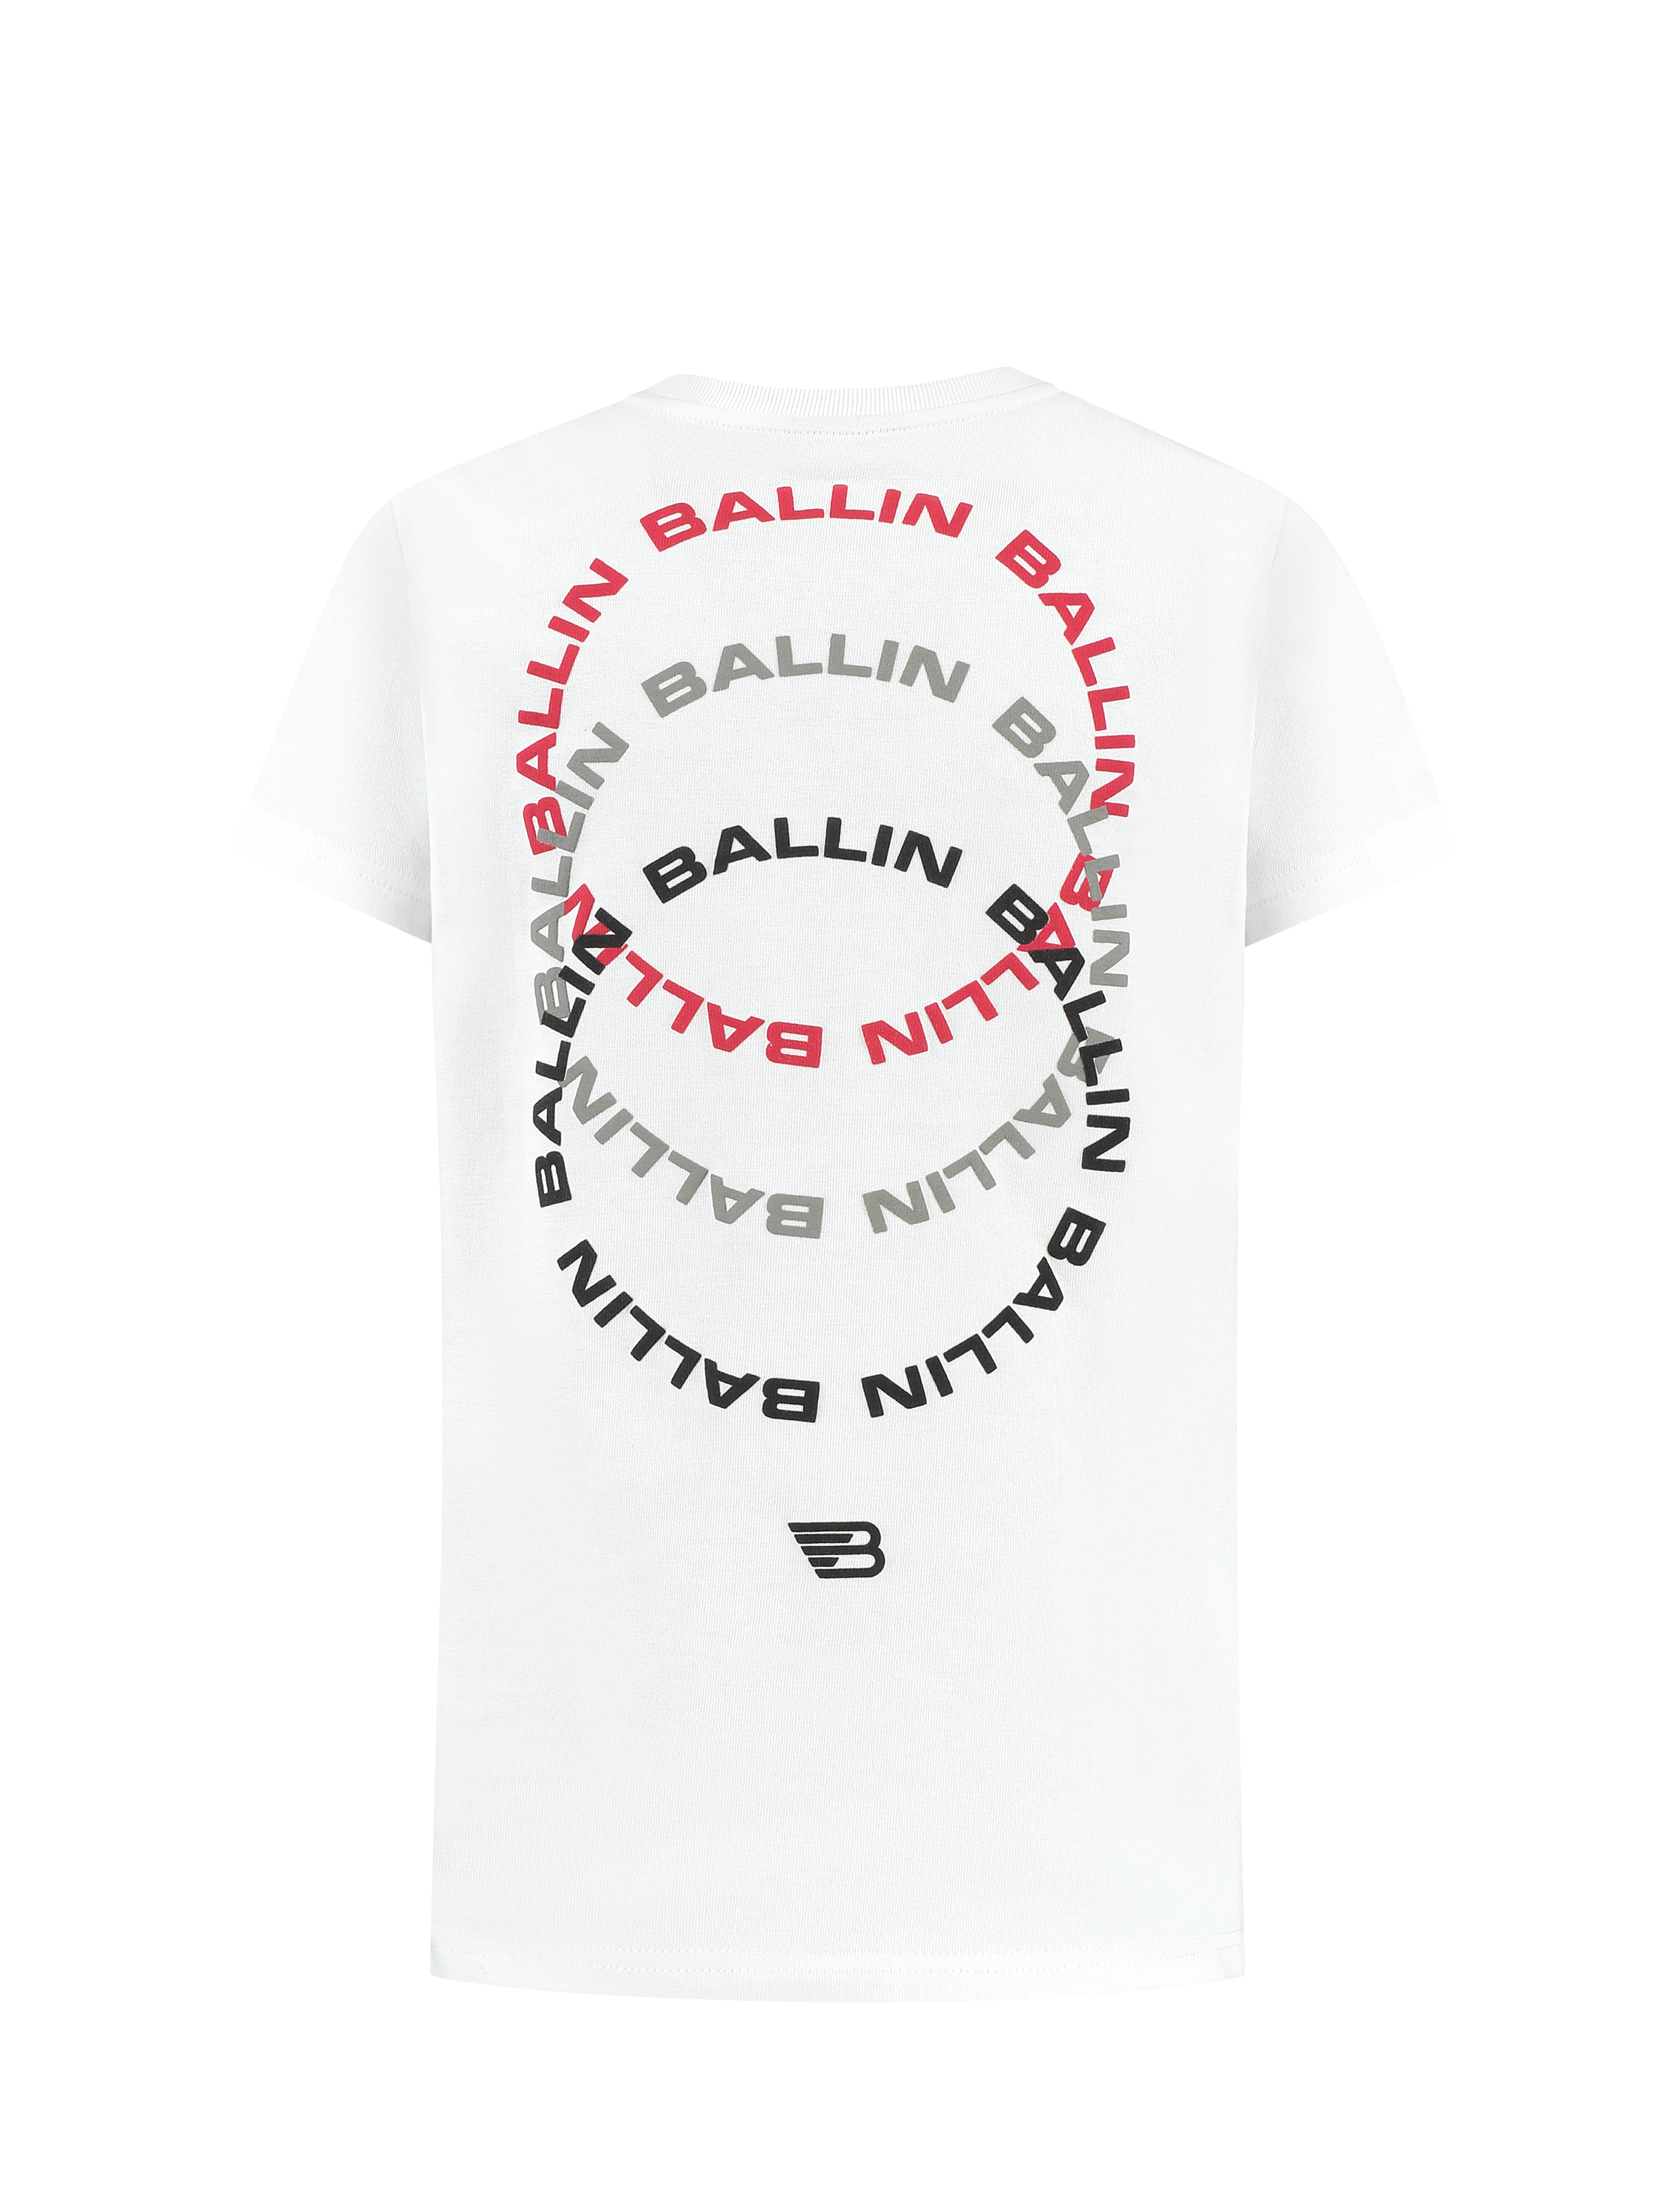 Ballin Amsterdam T-shirt with front and backprint